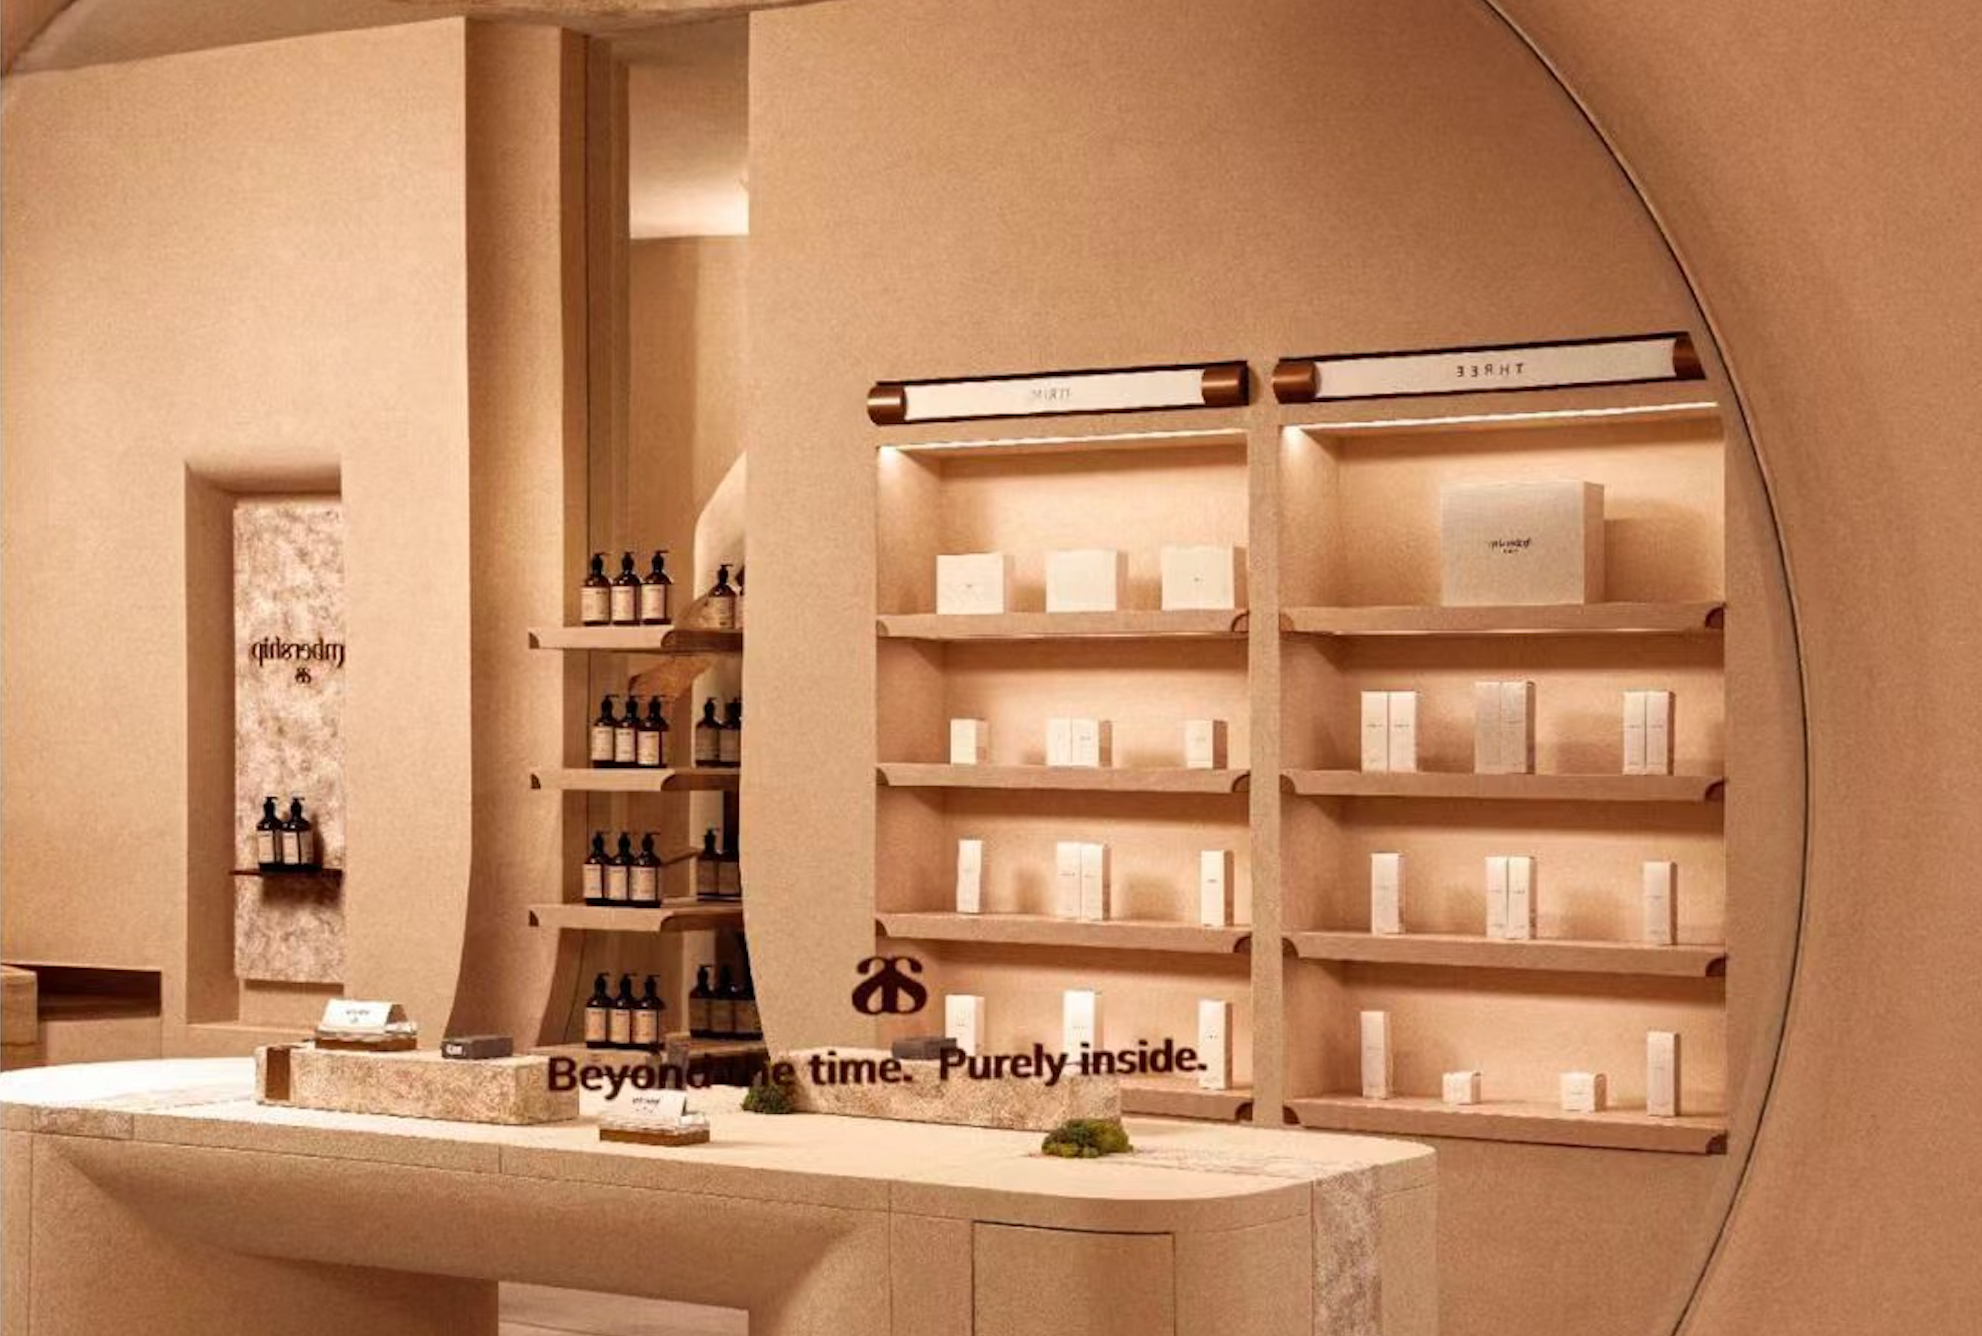 China's $67 billion beauty market is thriving. Explore the opportunities in skincare, fragrance, and personalized beauty in 2024. Image: Xiaohongshu